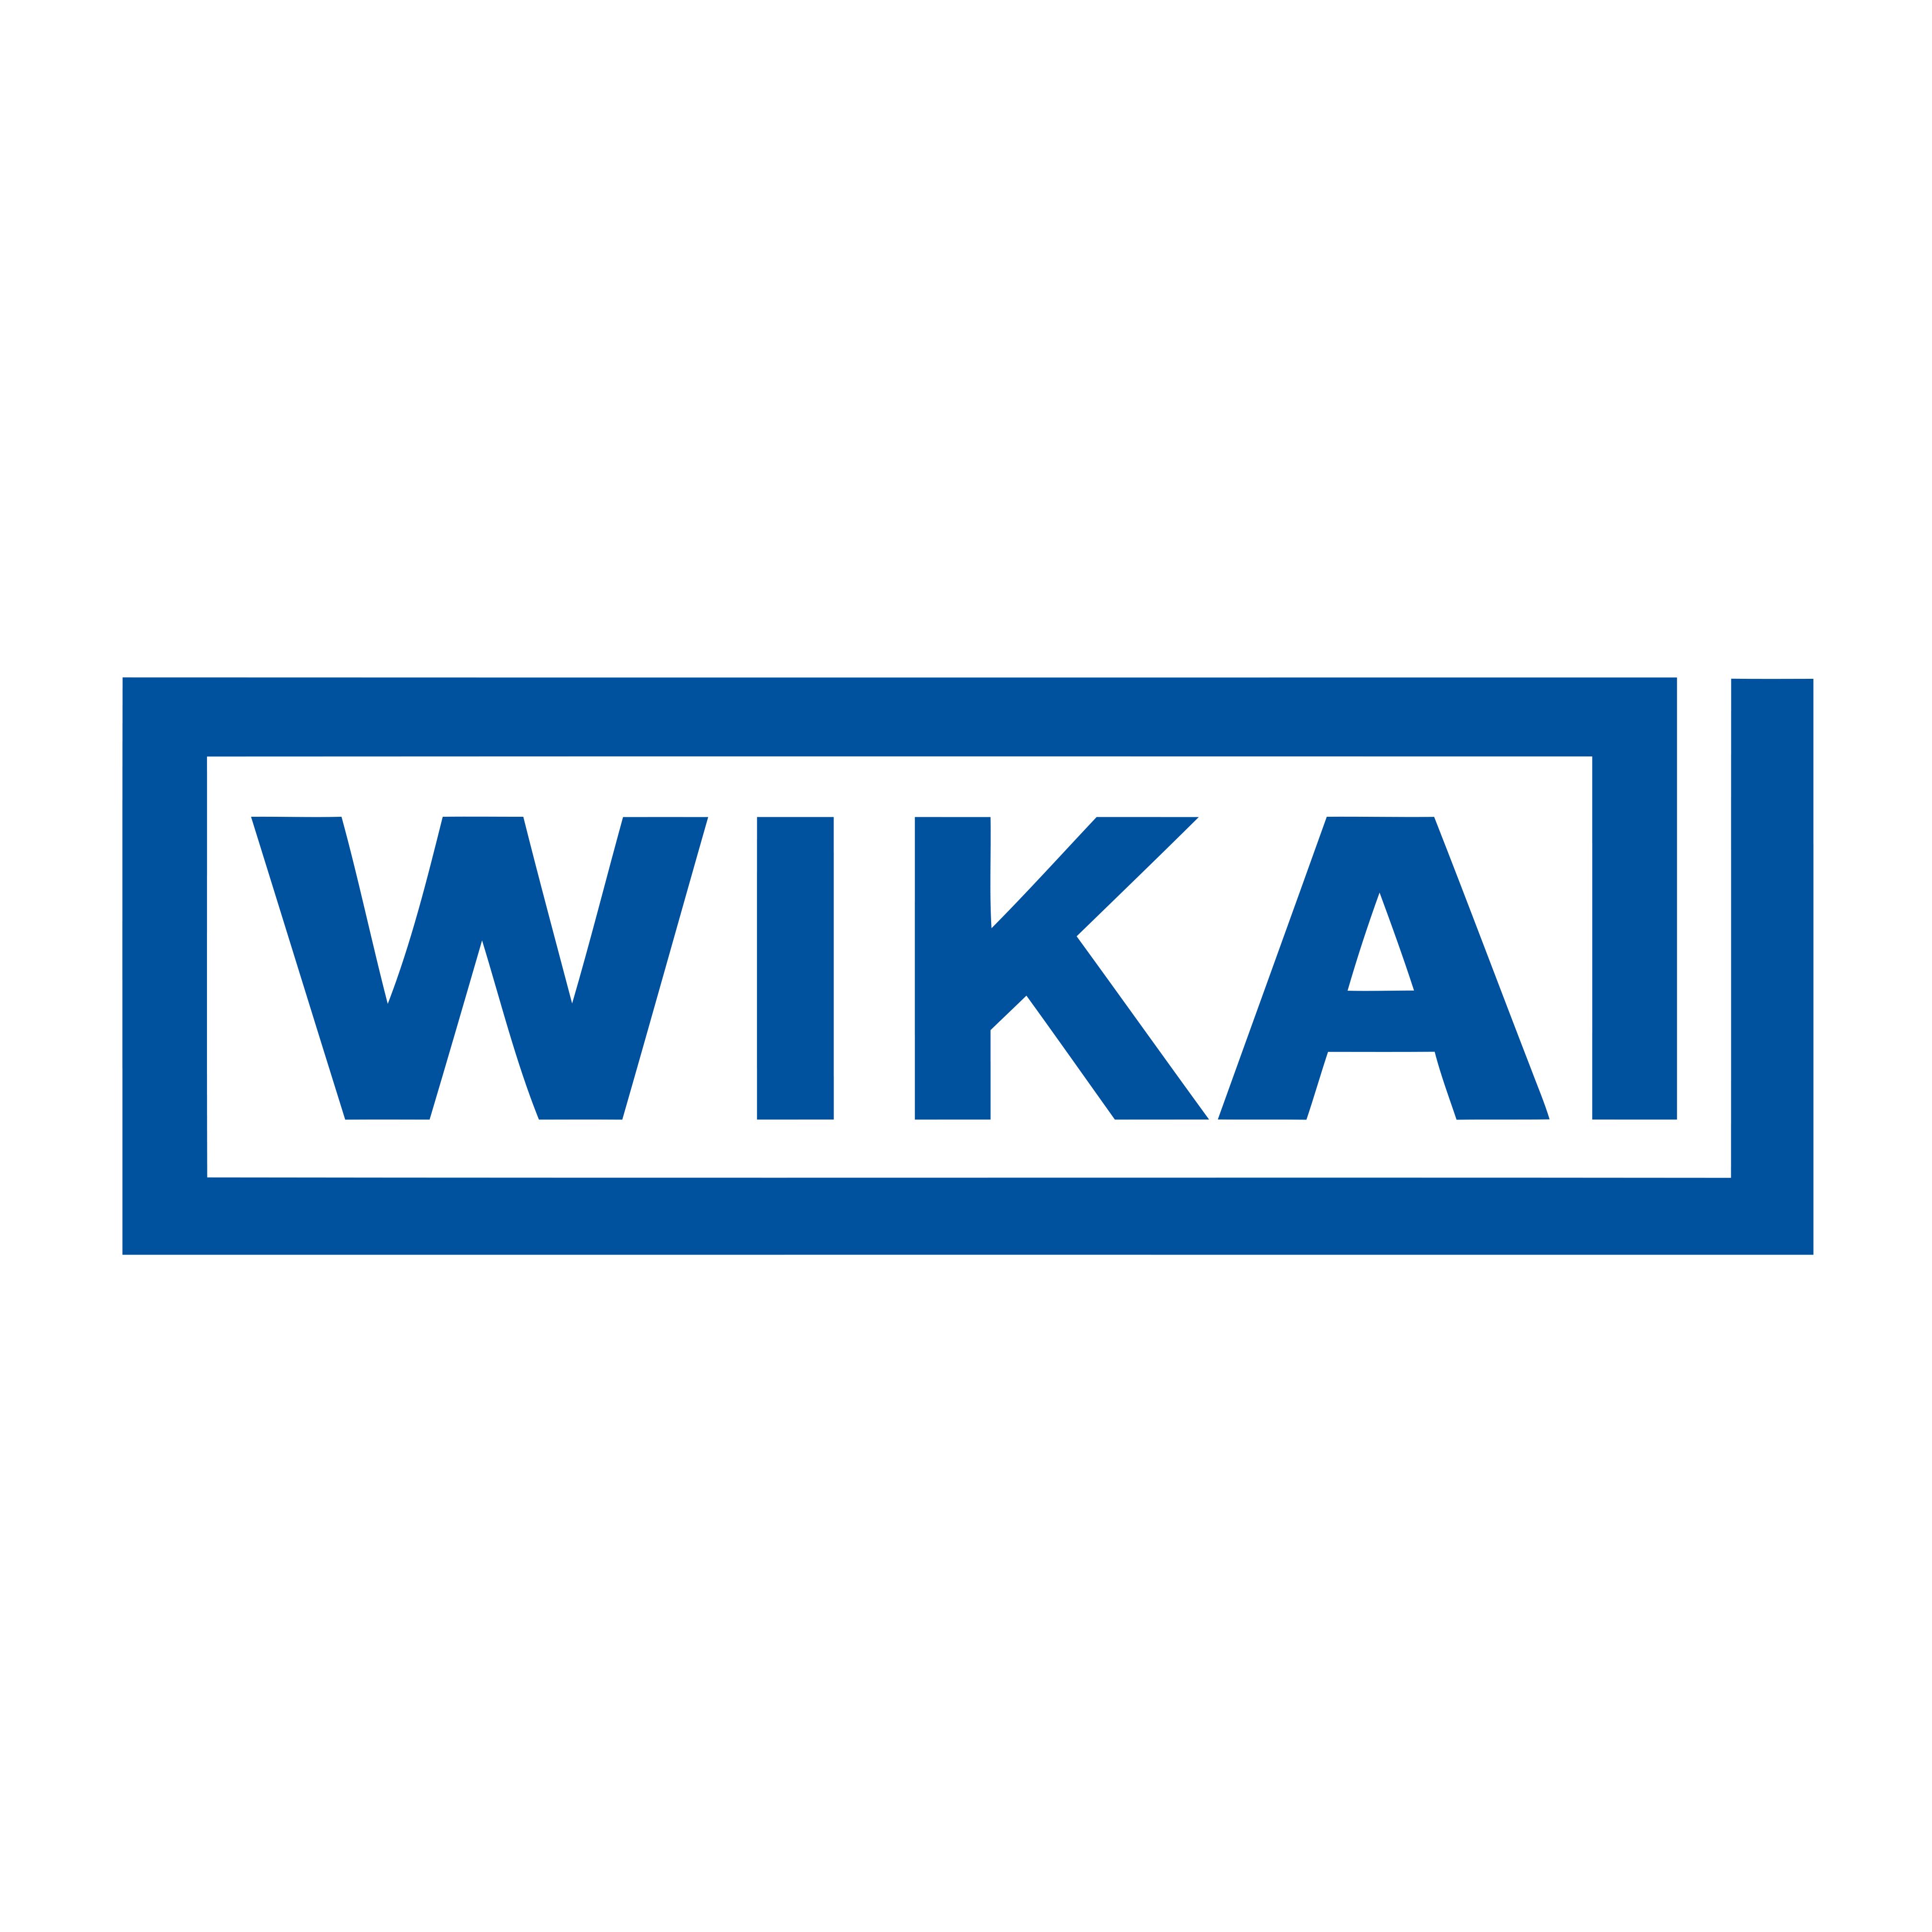 The image displays the logo for wika, which is typically associated with a company that specializes in pressure and temperature measurement technology. The logo consists of the word "wika" in bold, capital letters.